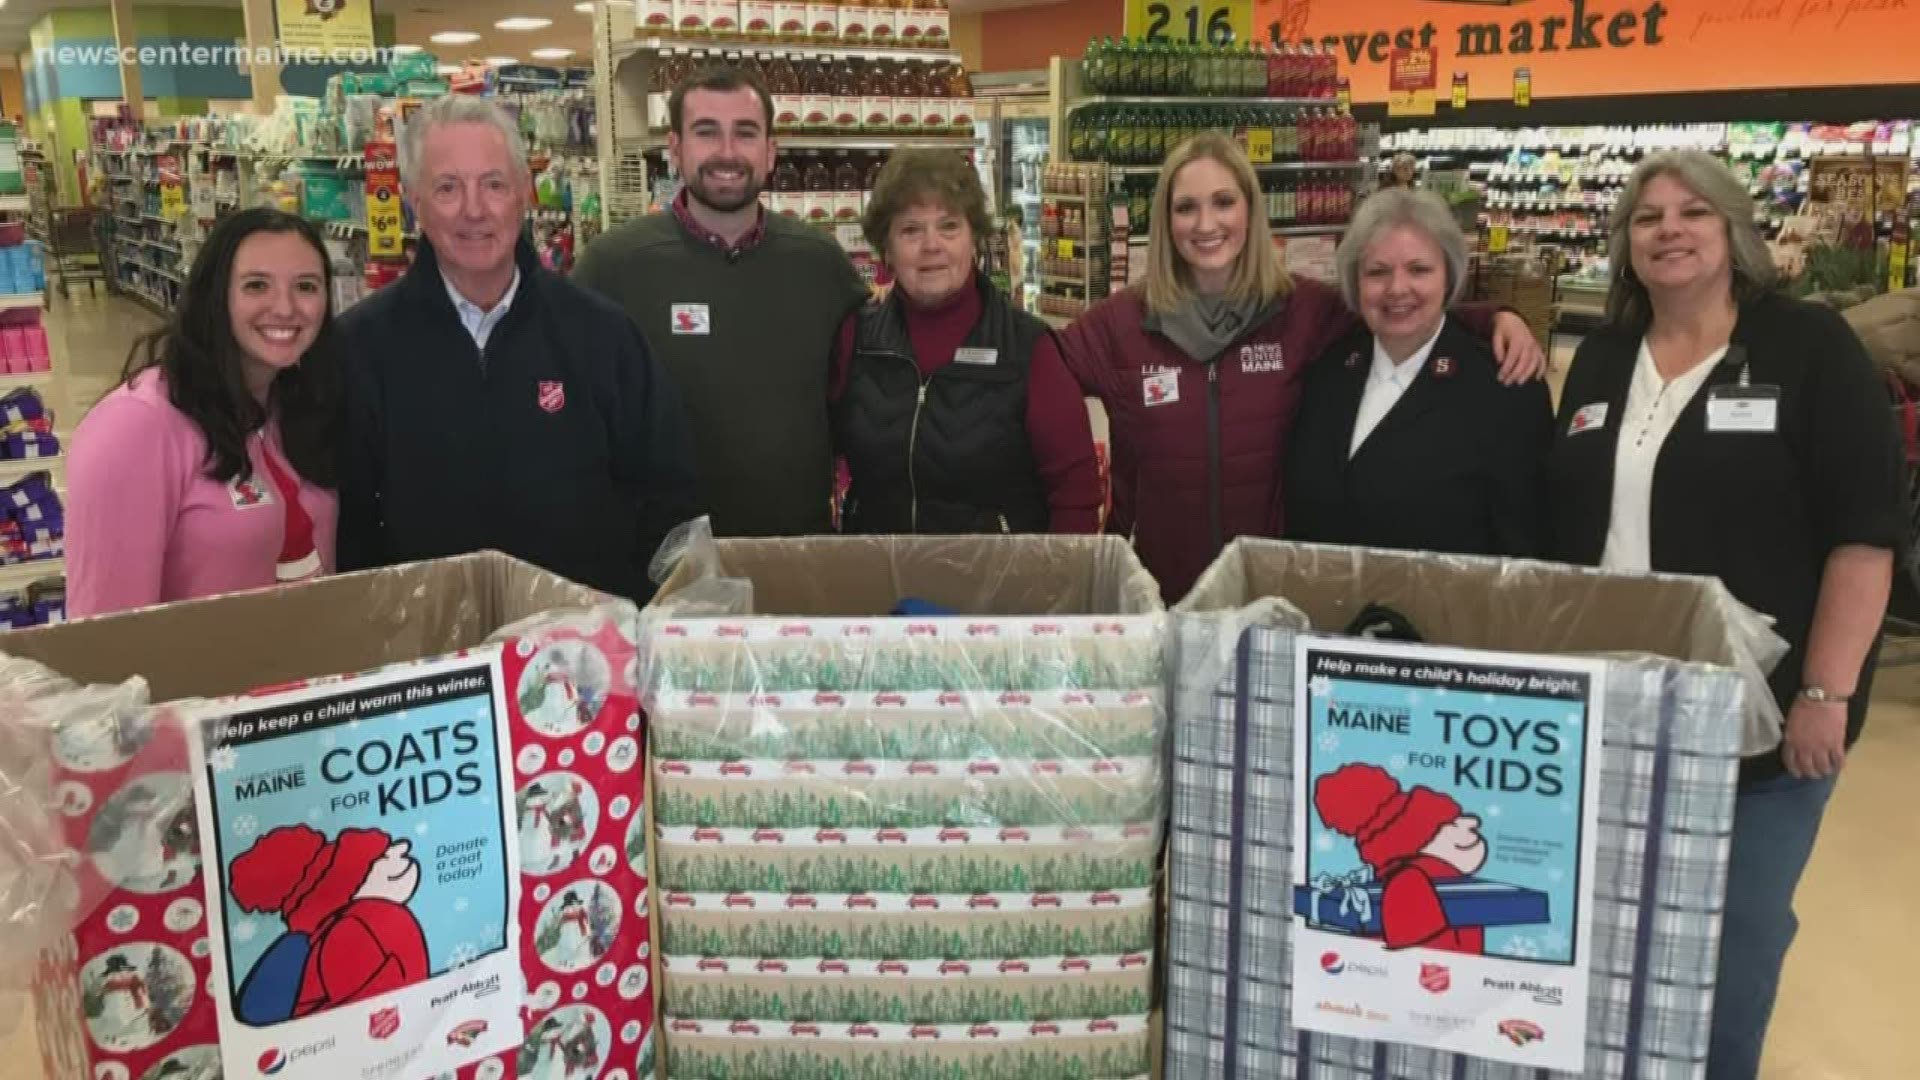 Over 3-thousand coats, 56-hundred toys and 24-hundred dollars were donated during NEWS CENTER Maine's 37th annual Coats and Toys for Kids Campaign.